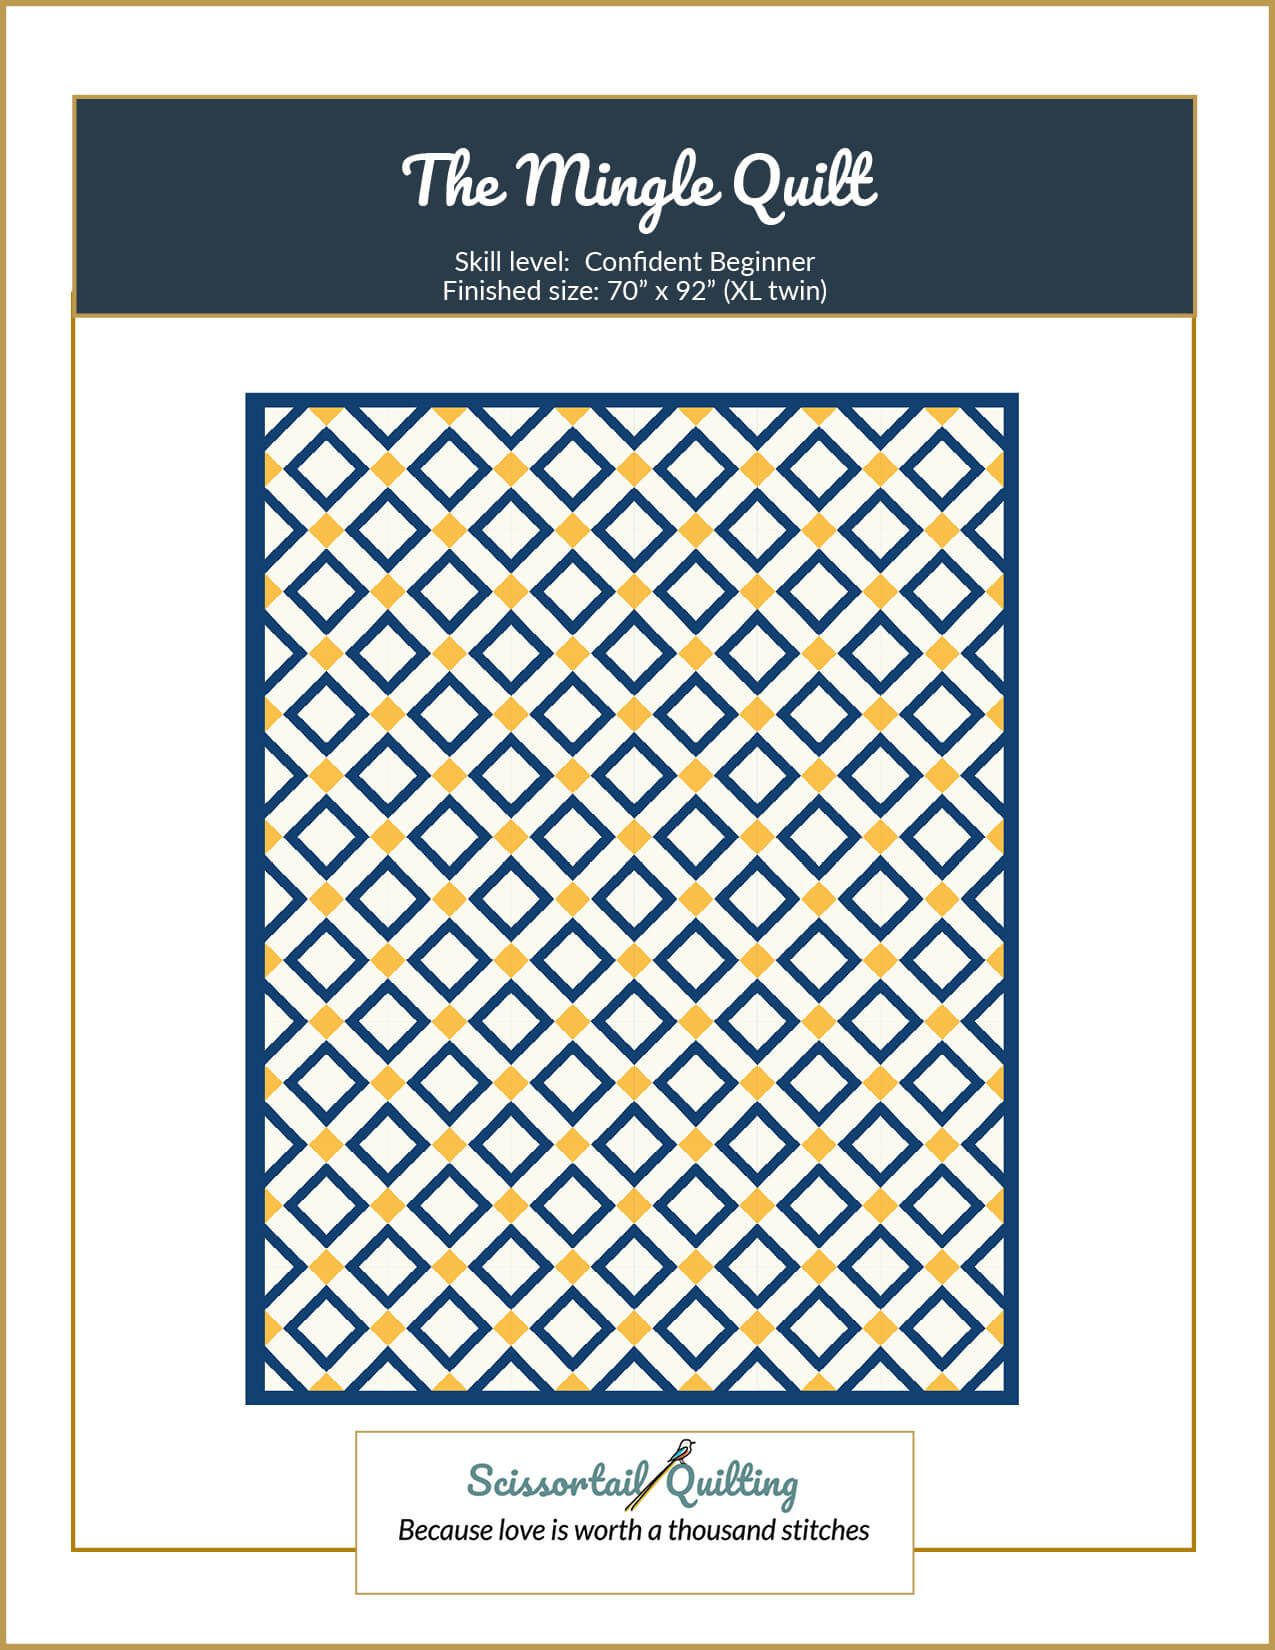 Image of the Cover for the Mingle Quilt Pattern